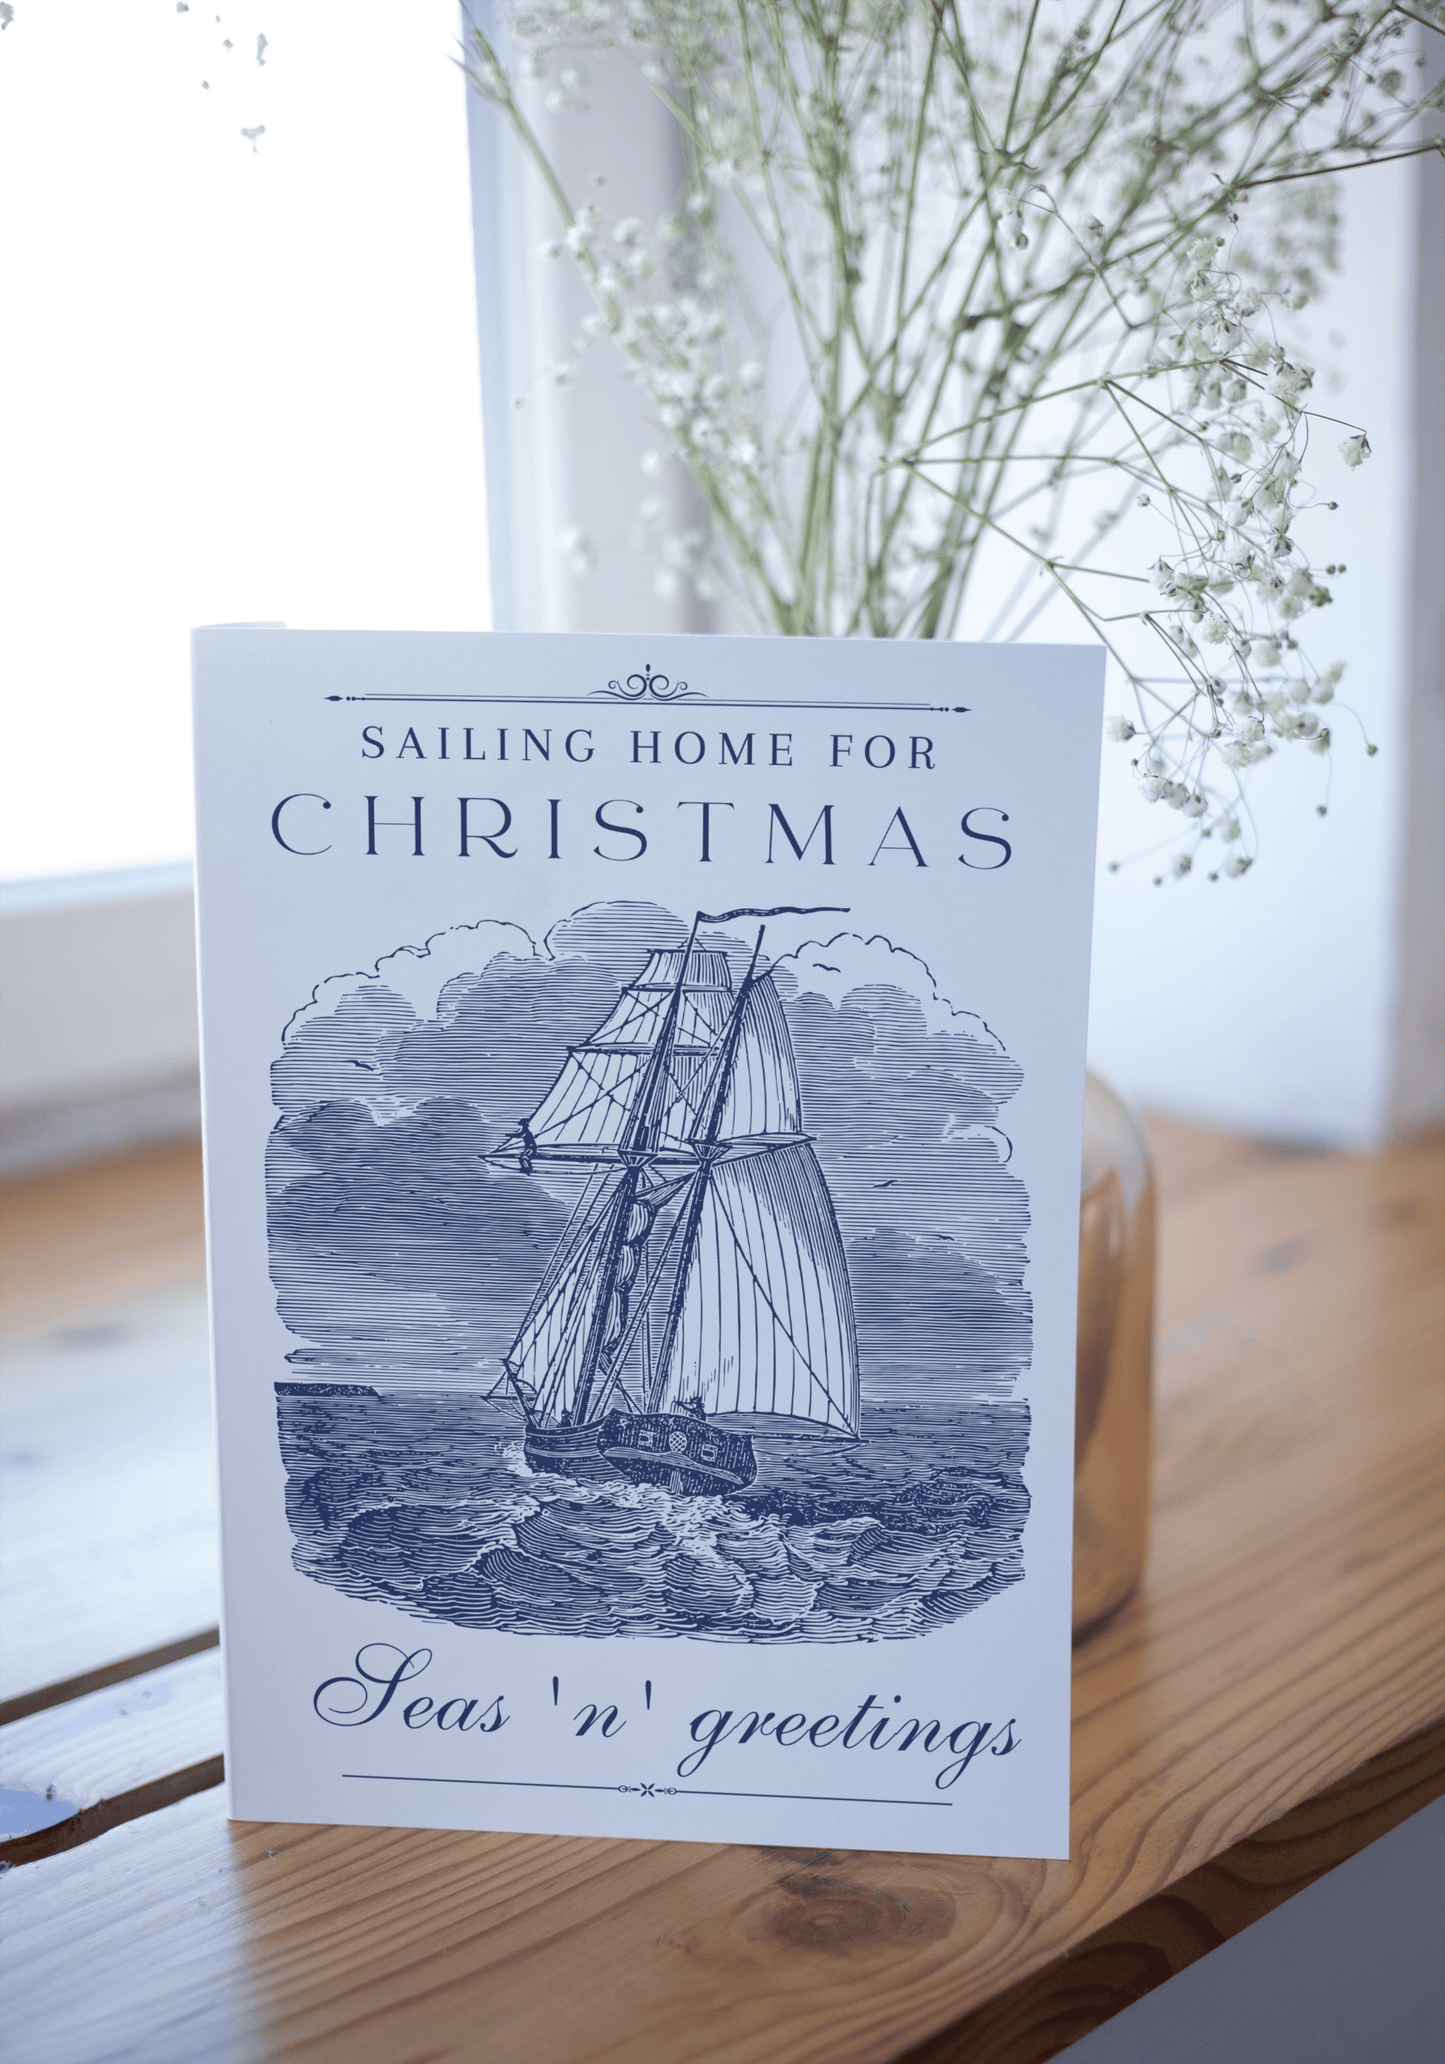 Nautical Christmas card (Sailing home for Christmas) Great Harbour Gifts